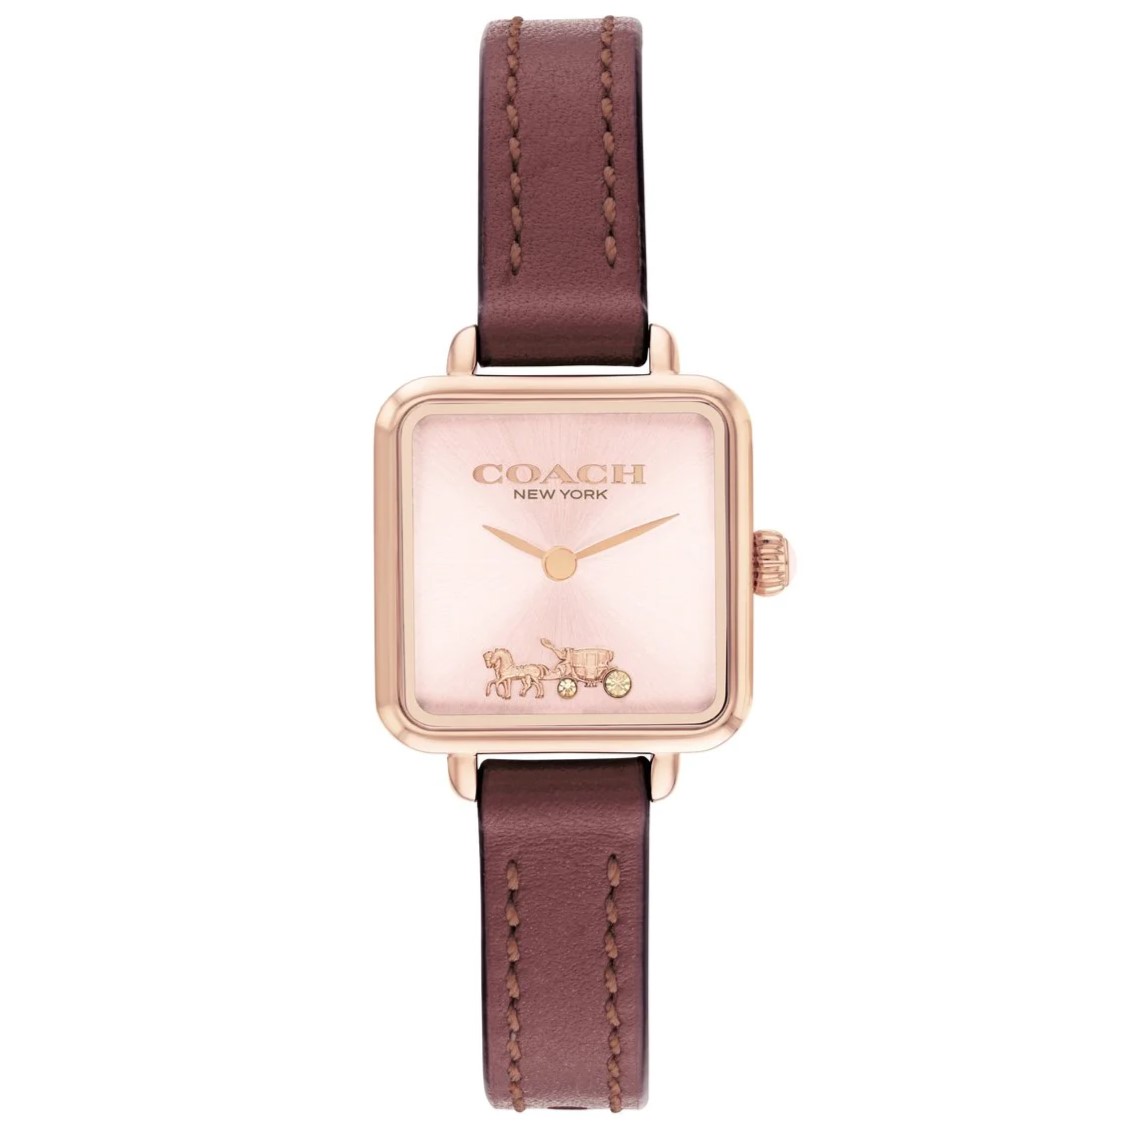 ĐỒNG HỒ ĐEO TAY DÂY DA COACH CASS PINK QUARTZ ROSE GOLD CASE AND BURGUNDY LEATHER STRAP WATCH 3